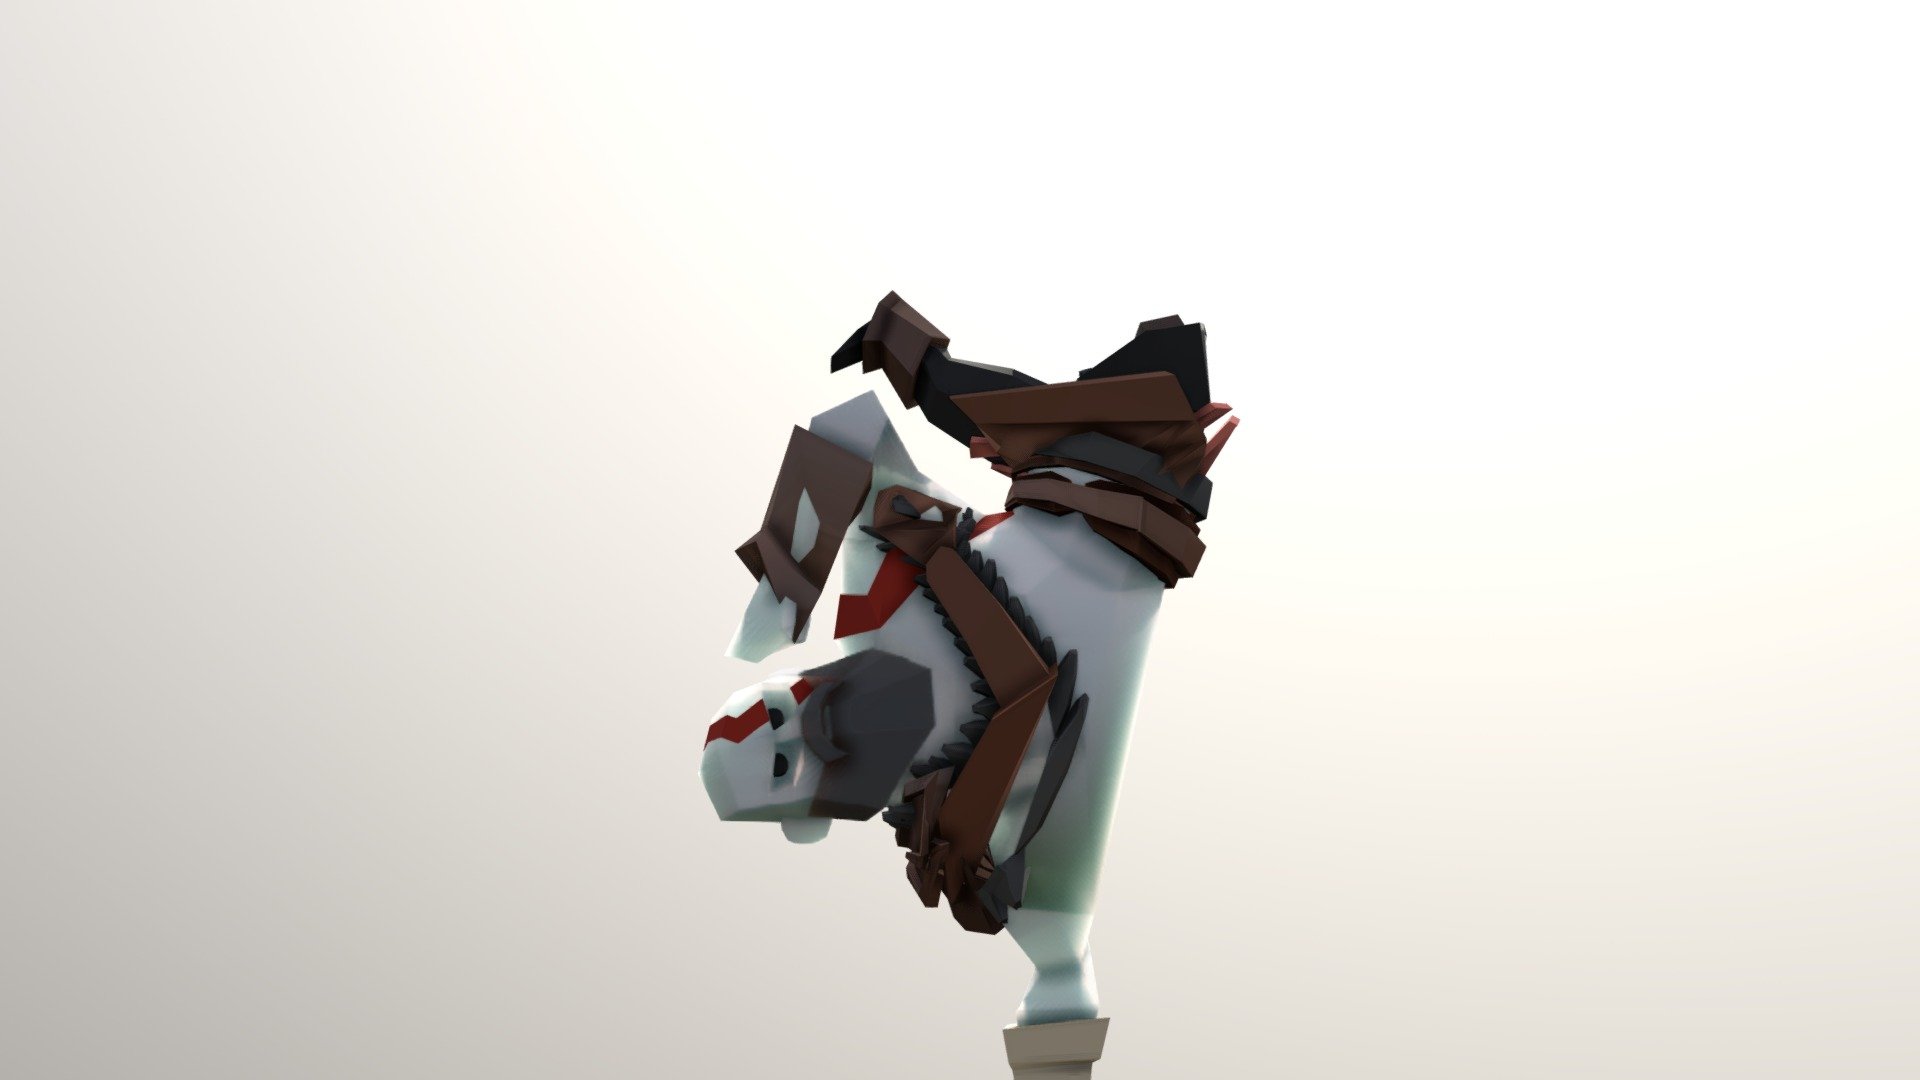 Low Poly Kratos from God of War Fanart made with Google Blocks, rigged and animated in Mixamo - LoPo Kratos Breakdancing - Download Free 3D model by tipatat 3d model